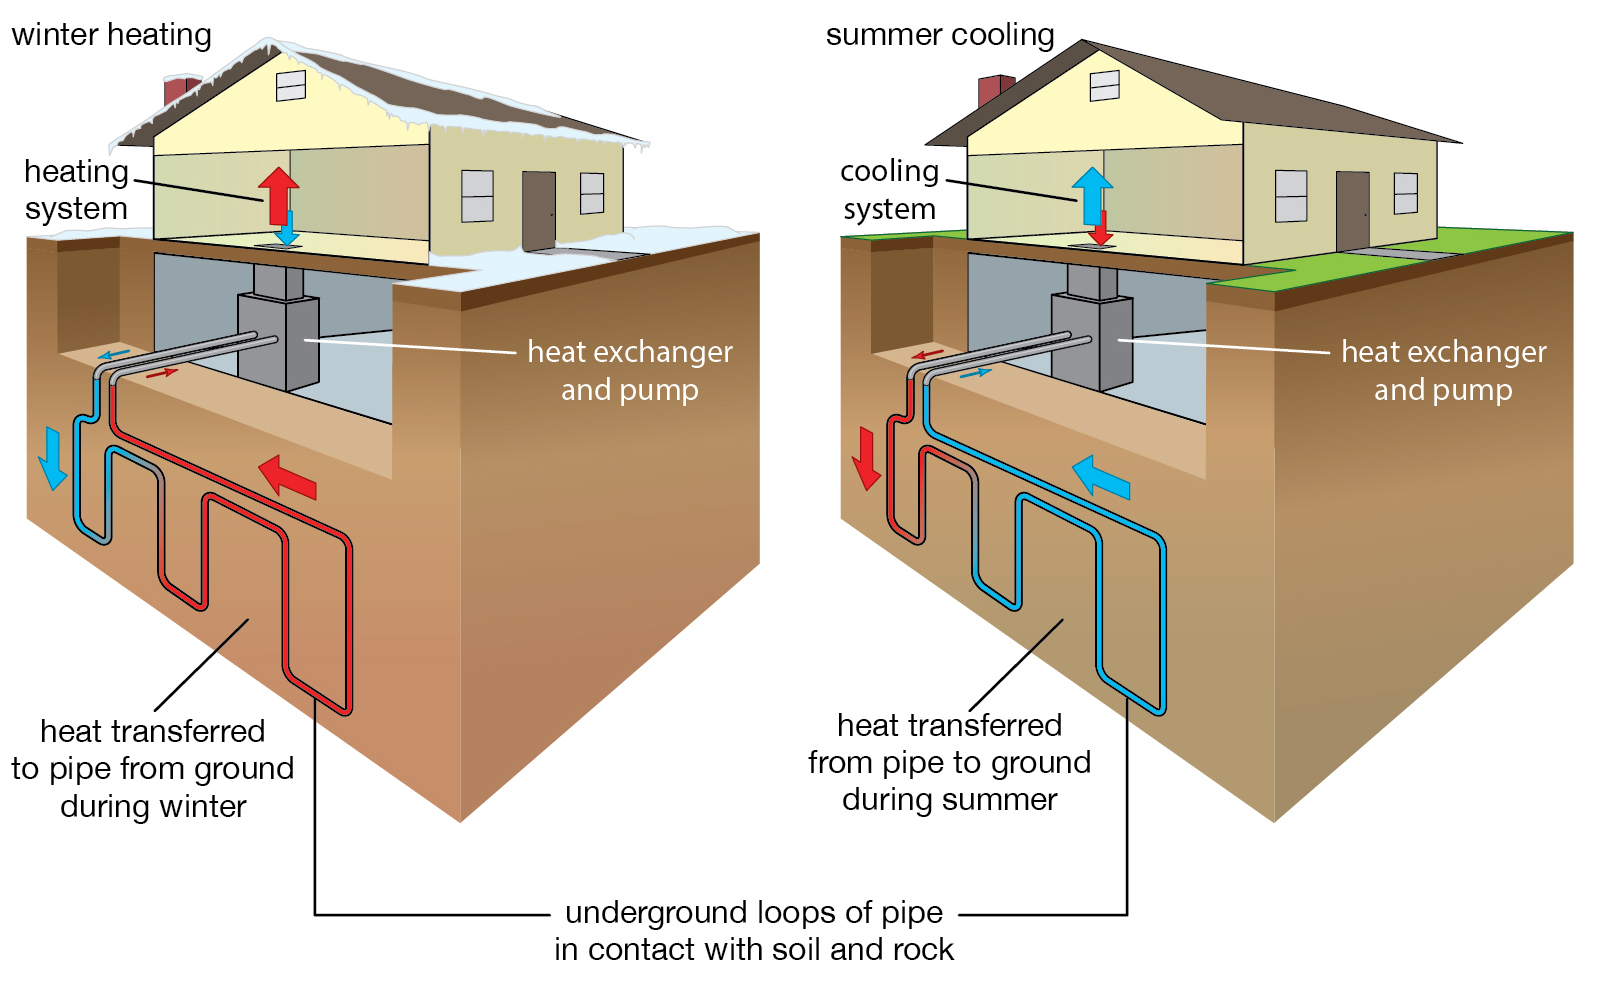 Diagram detailing a residential heat pump and how it works